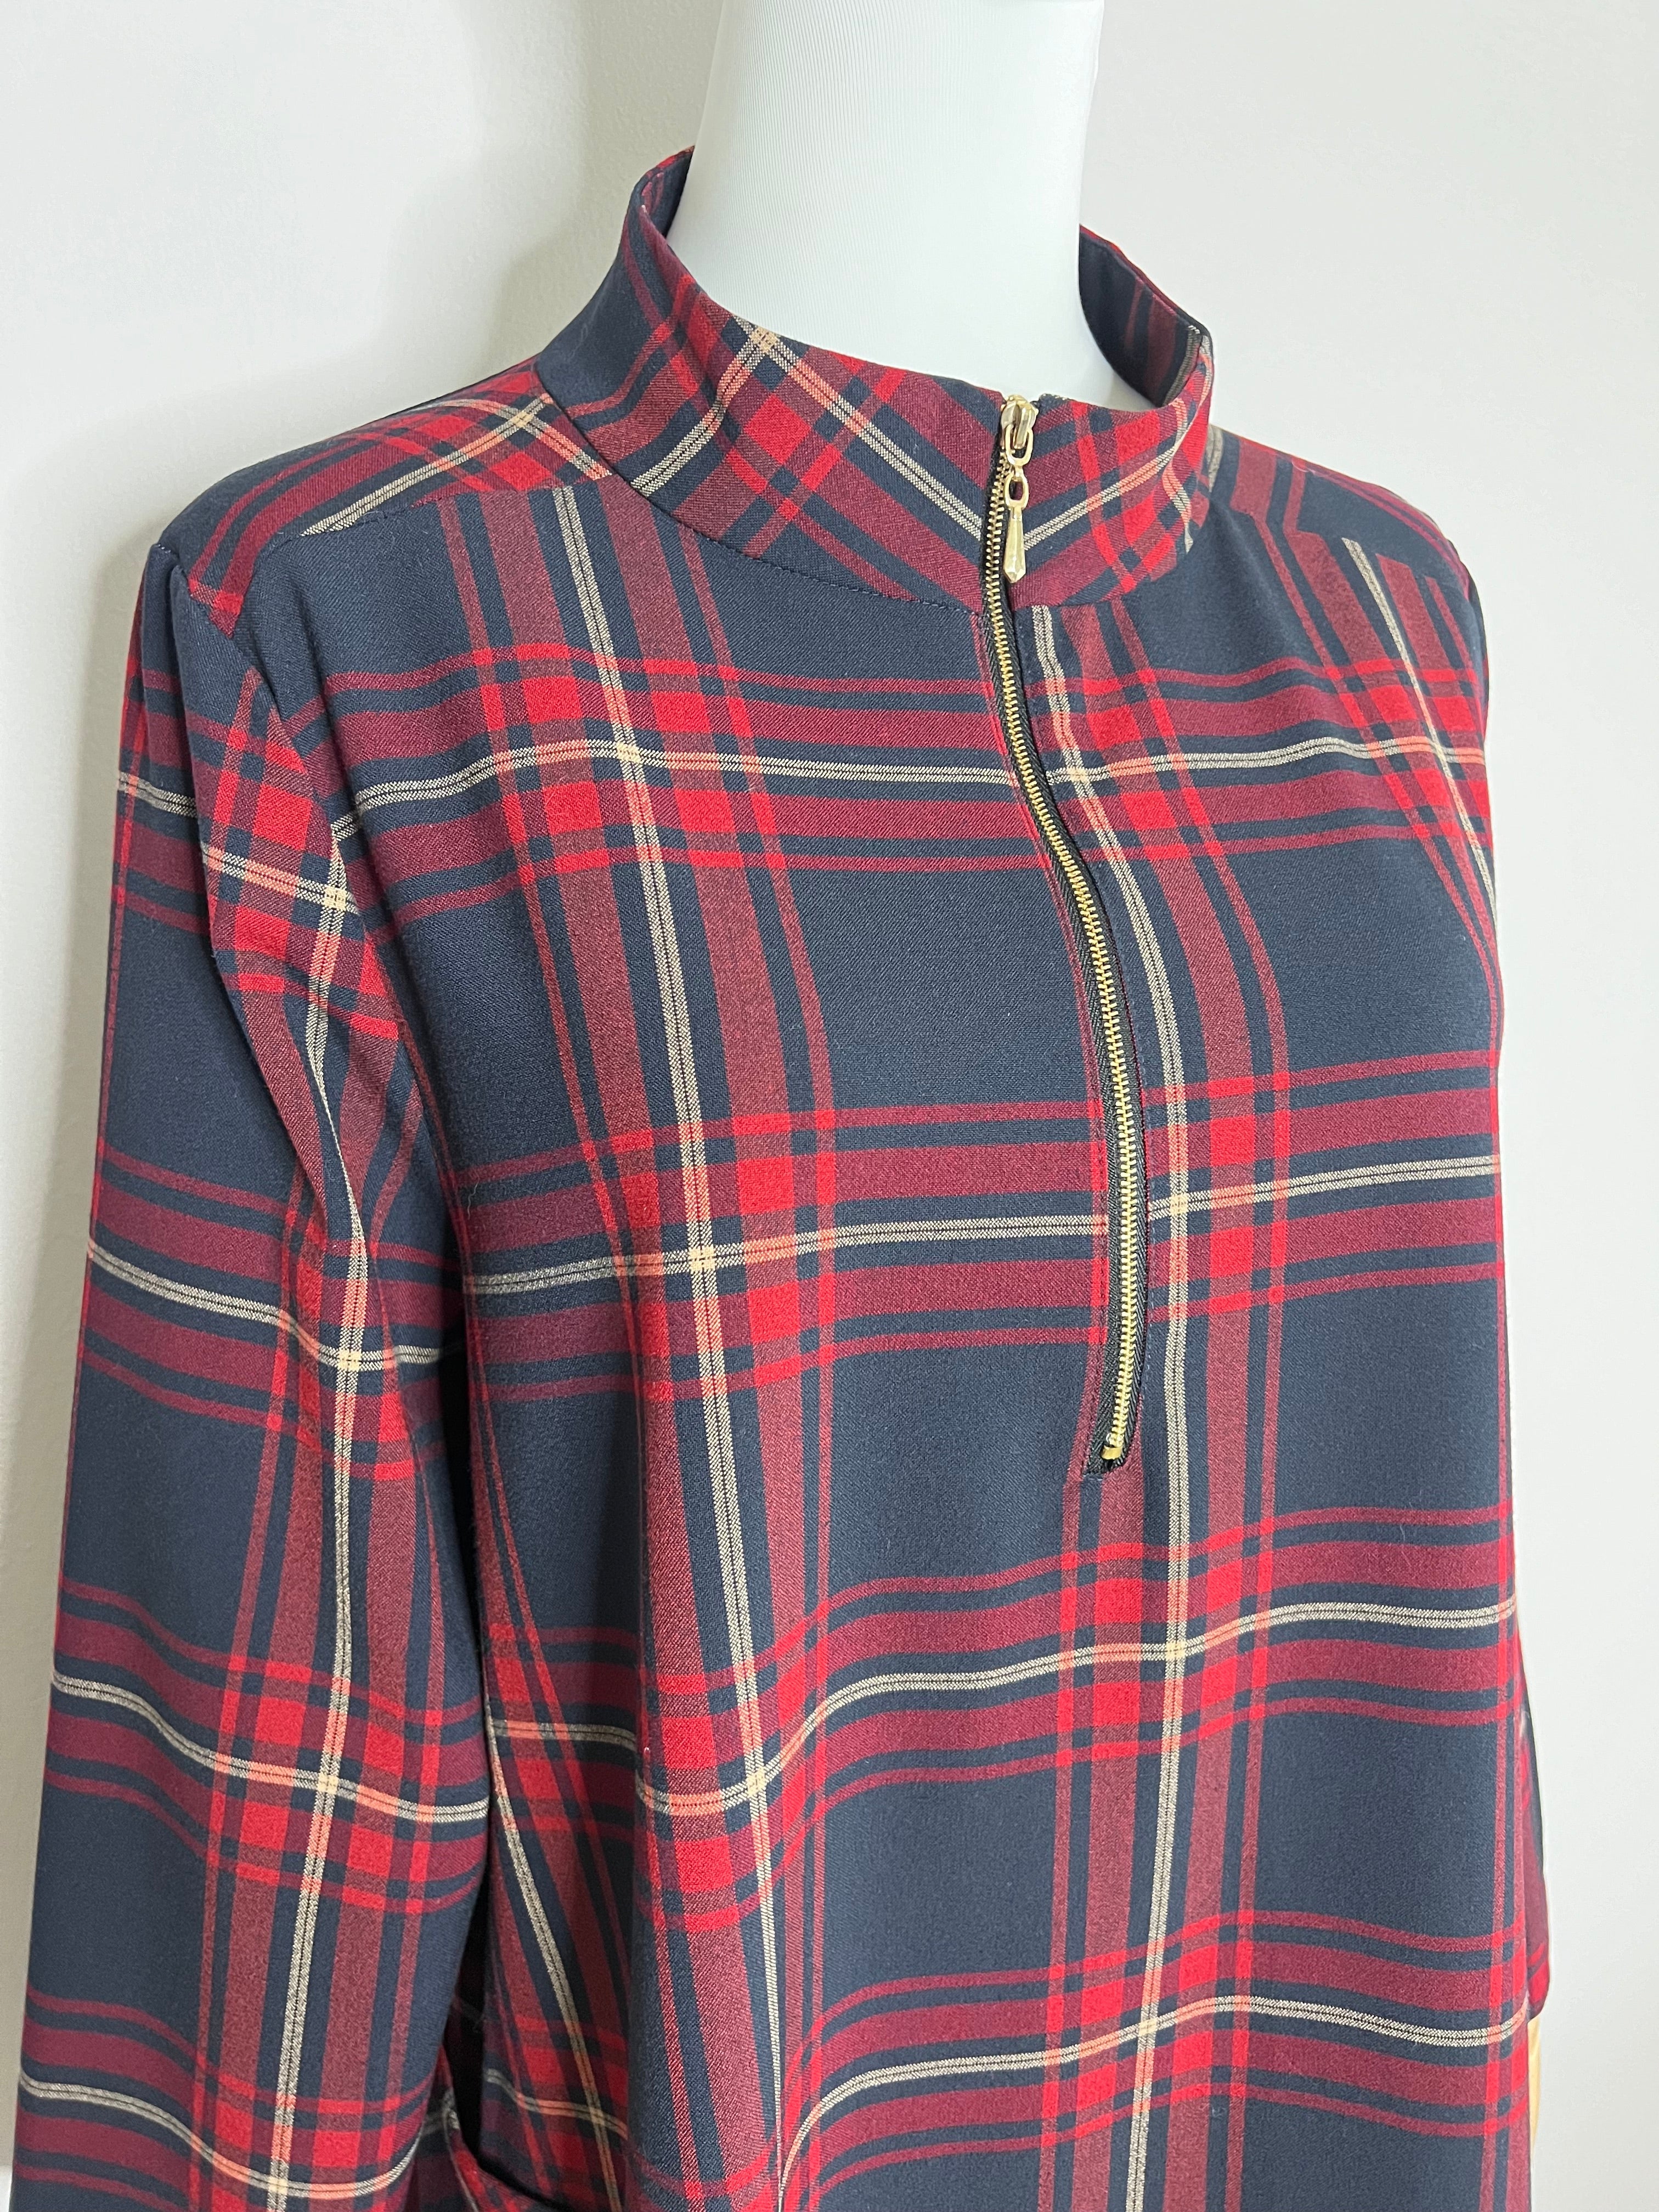 Basic plaid red & navy blue checkered dress with large gold zip front and two side pocket - ZARA